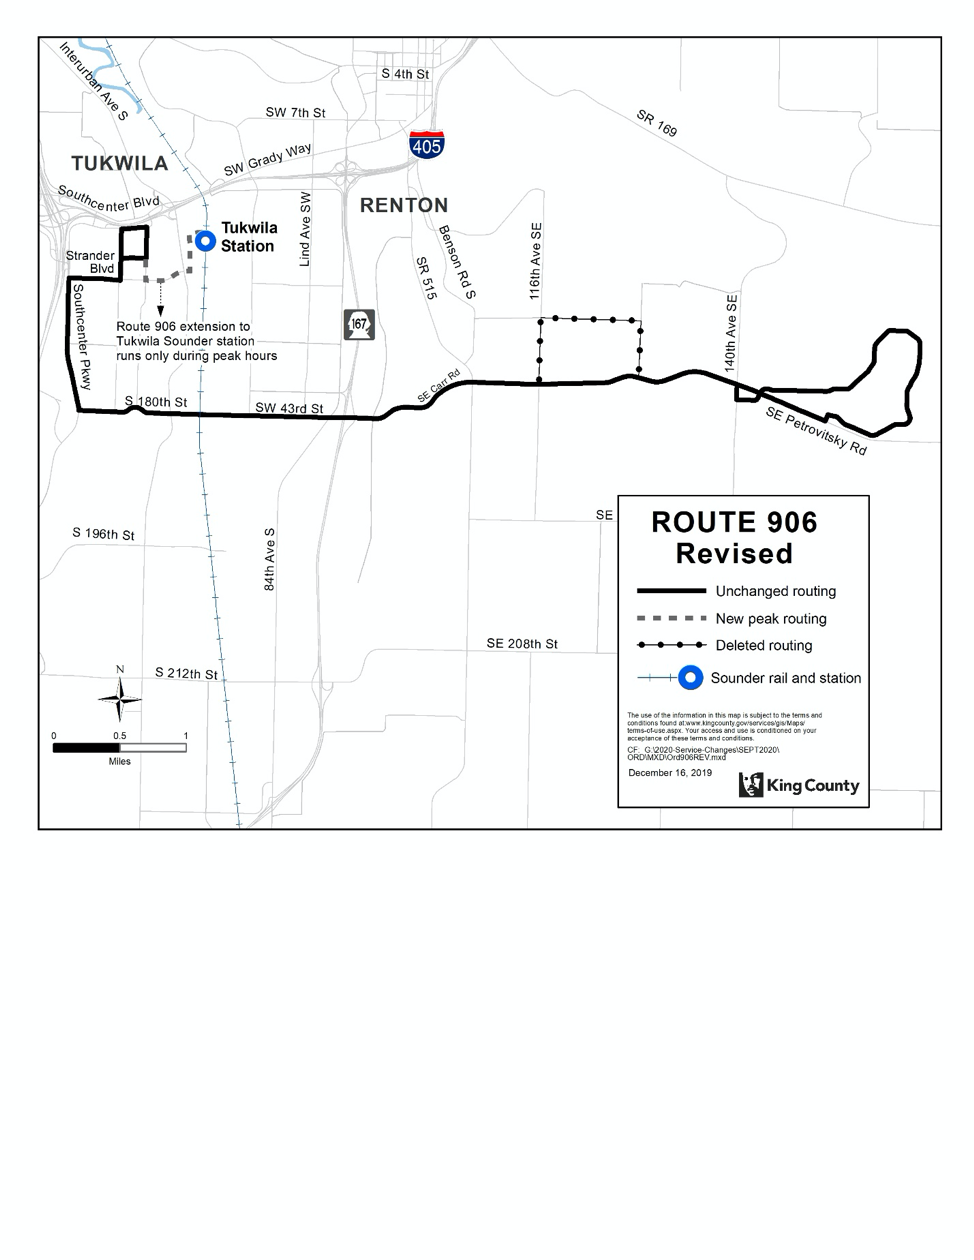 Revised Route 906. (King County)